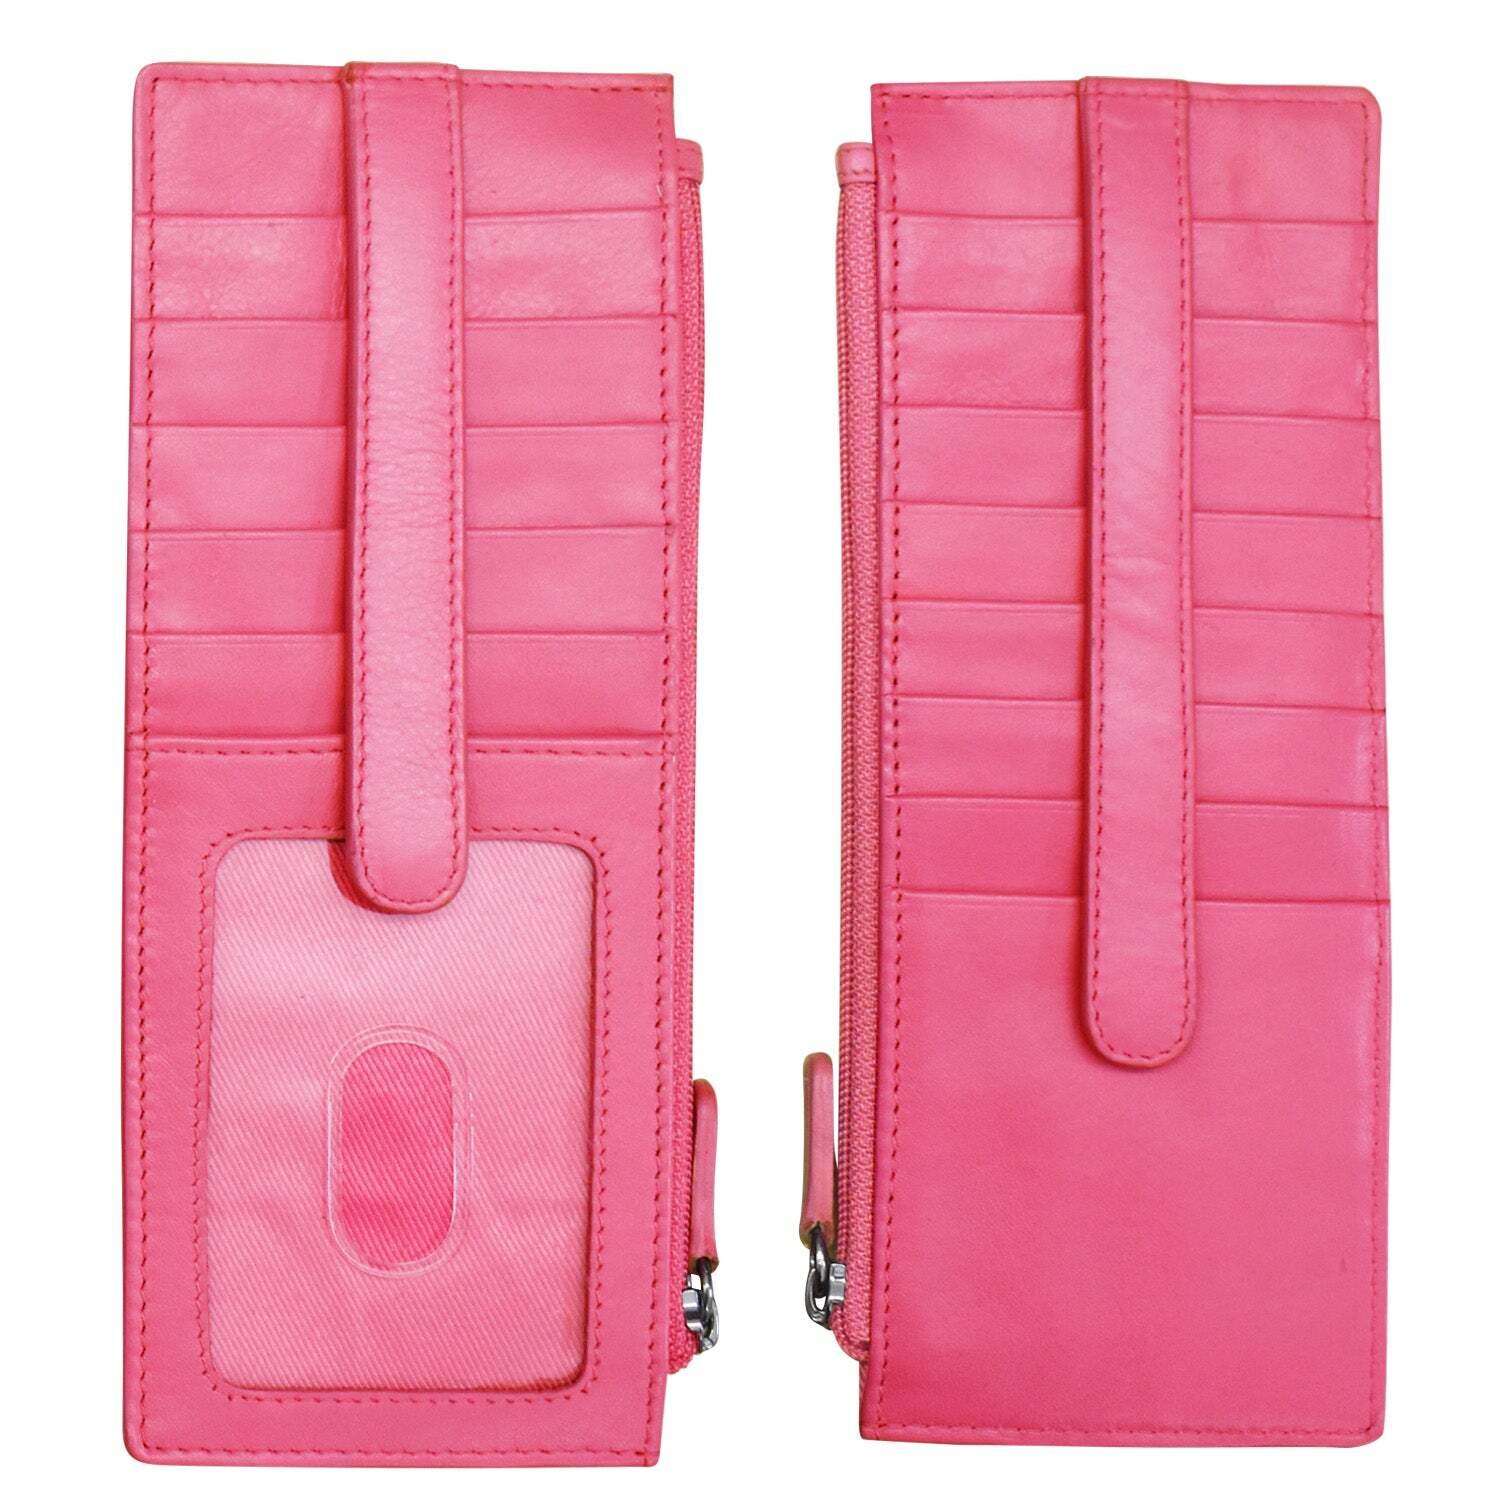 Double Sided Card Holder-Pink